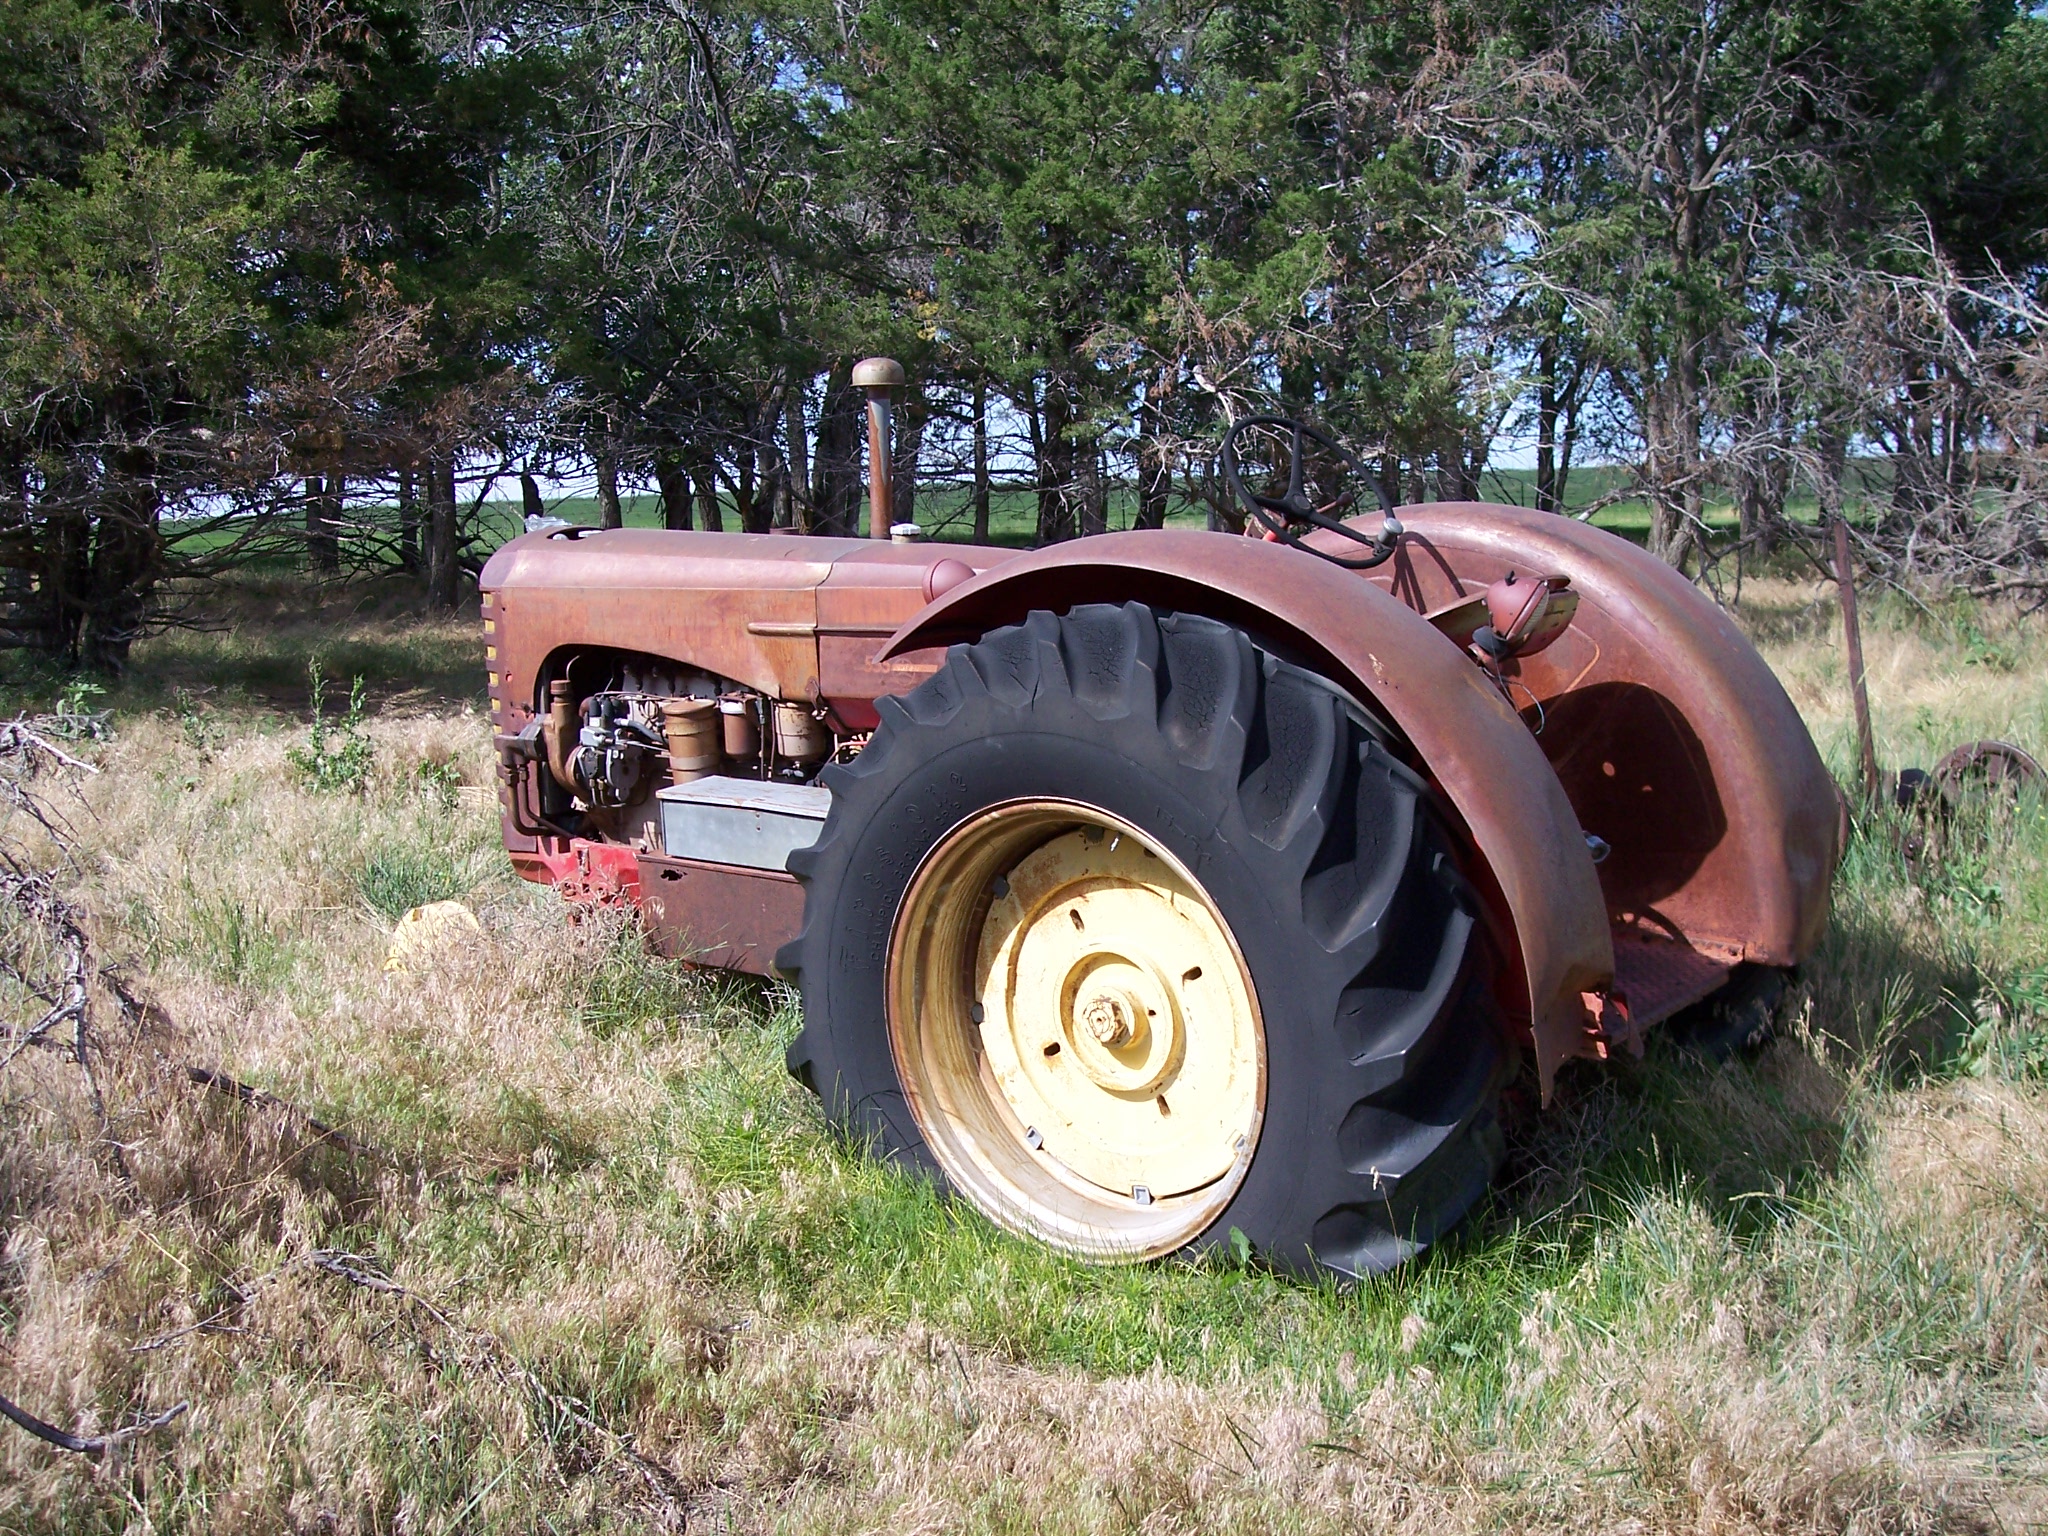 Old Tractor